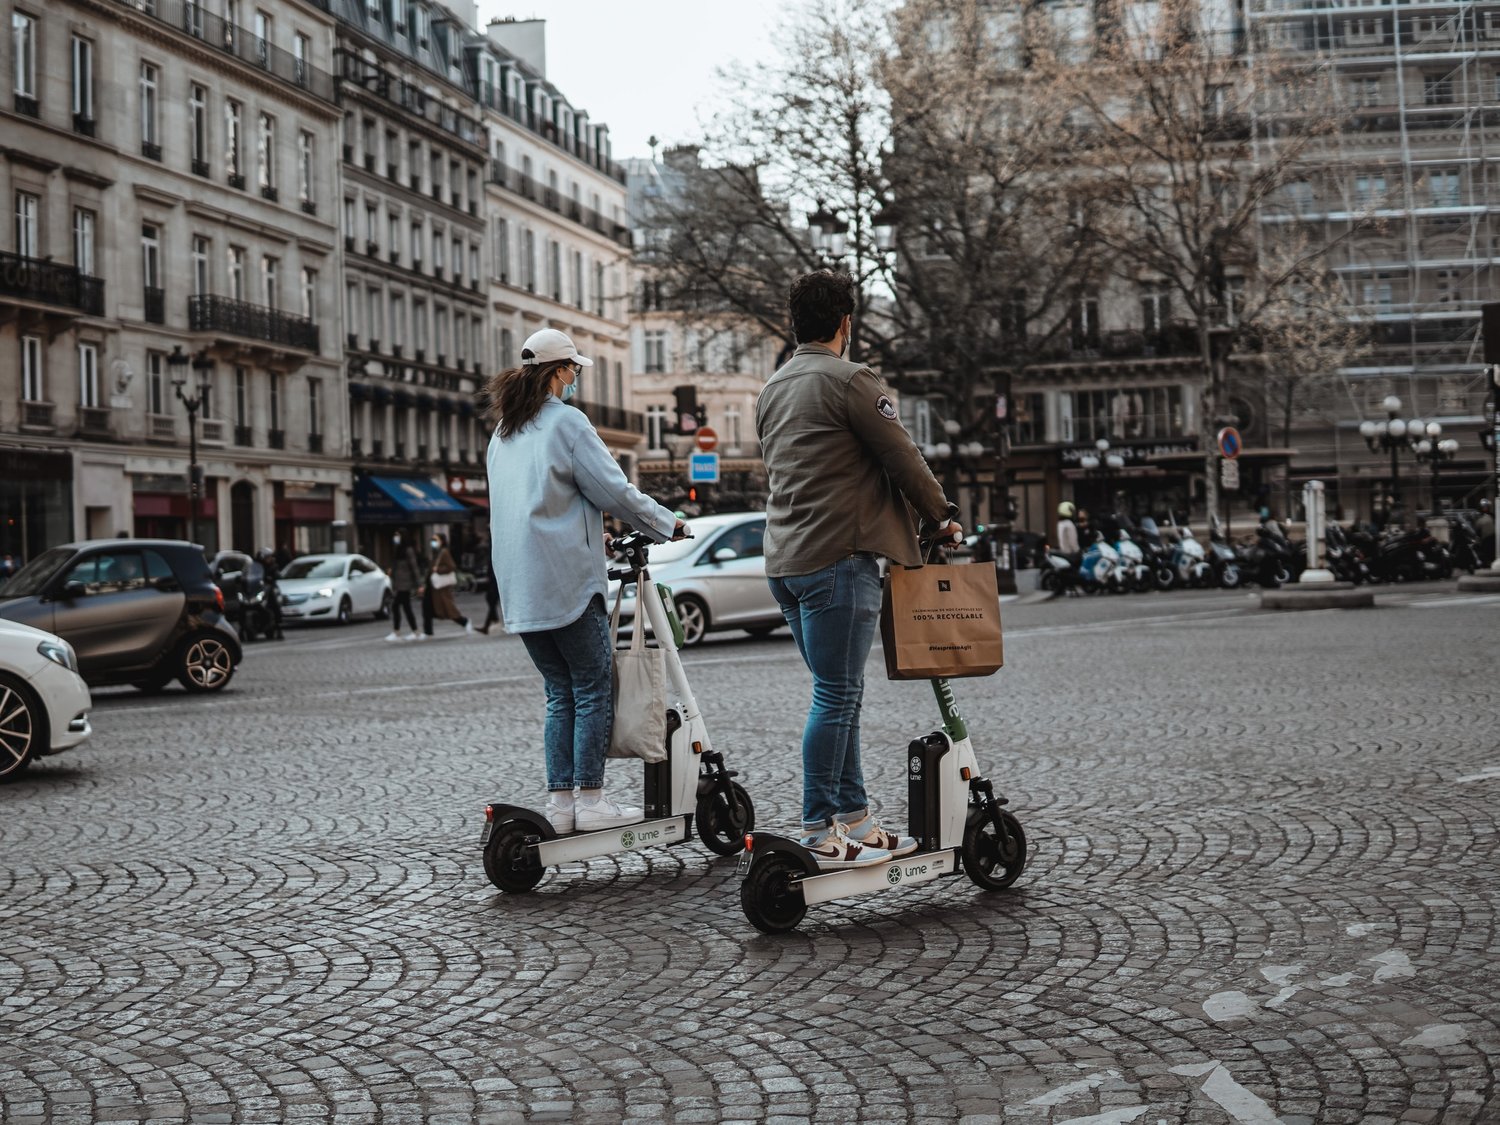 German man and woman riding white electric scooters